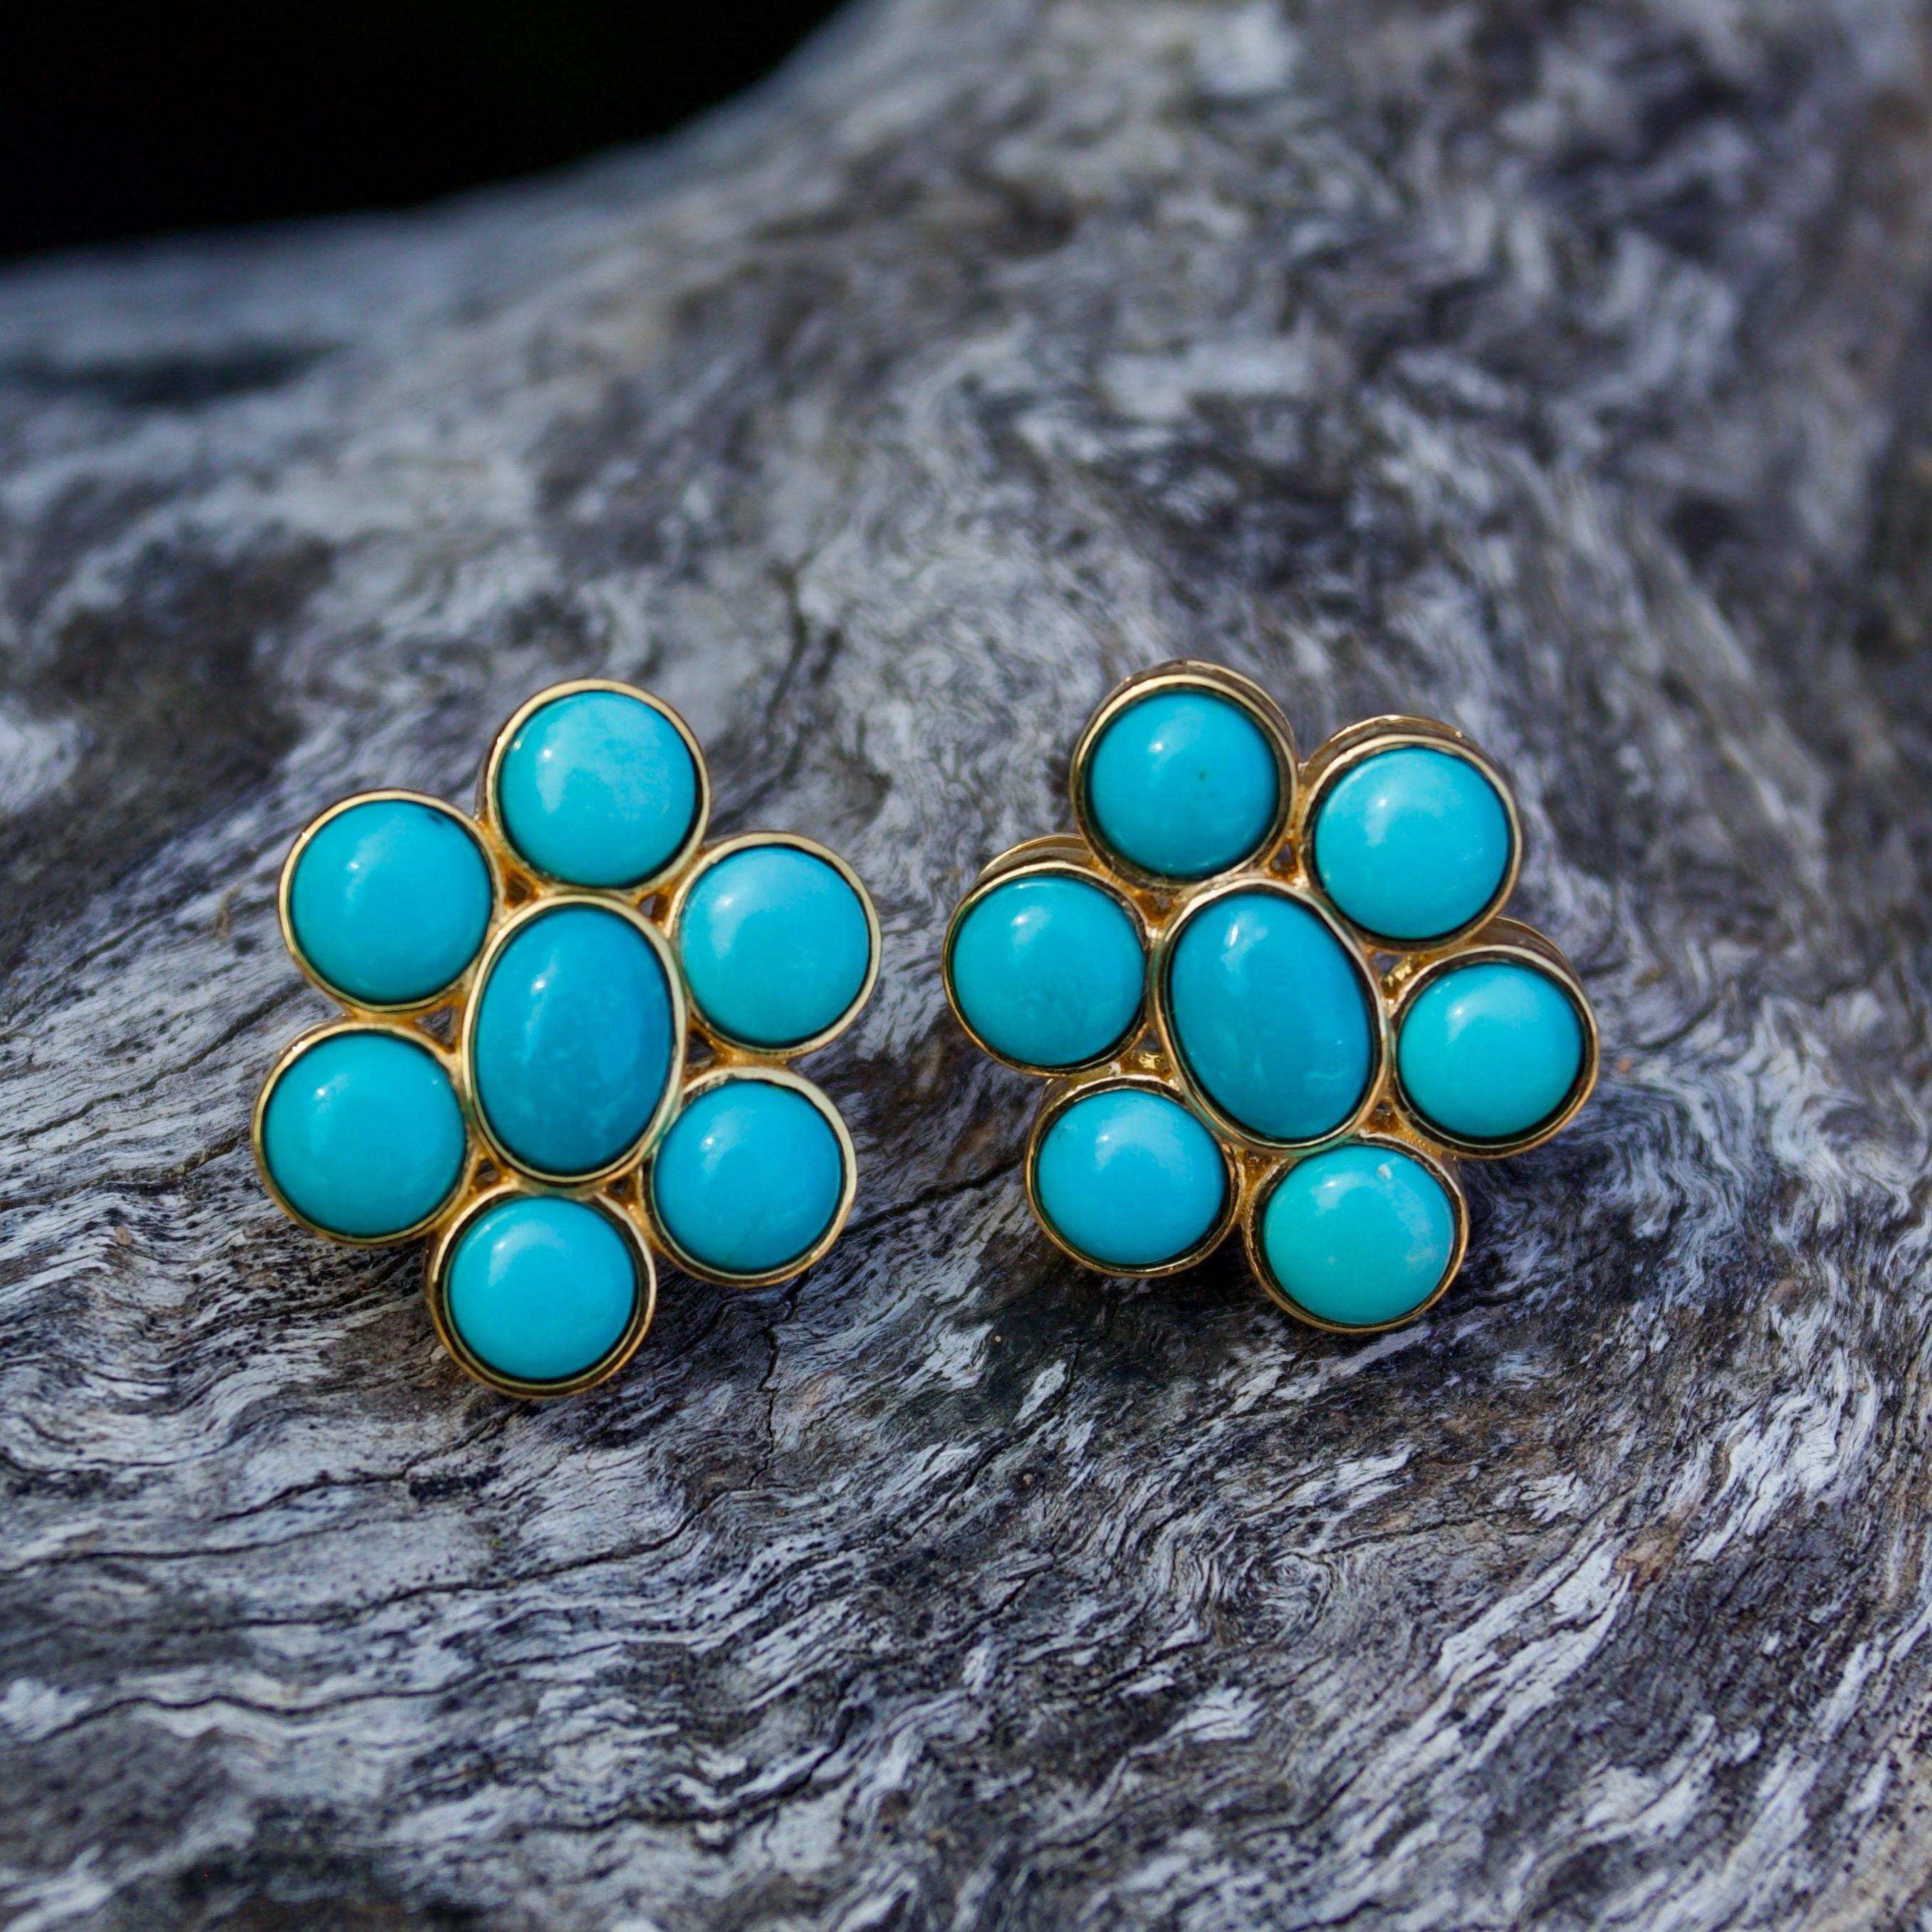 Oval Cut Nina Zhou 8ct Blue Turquoise Gemstone Cluster Earrings in 18k Yellow Gold For Sale